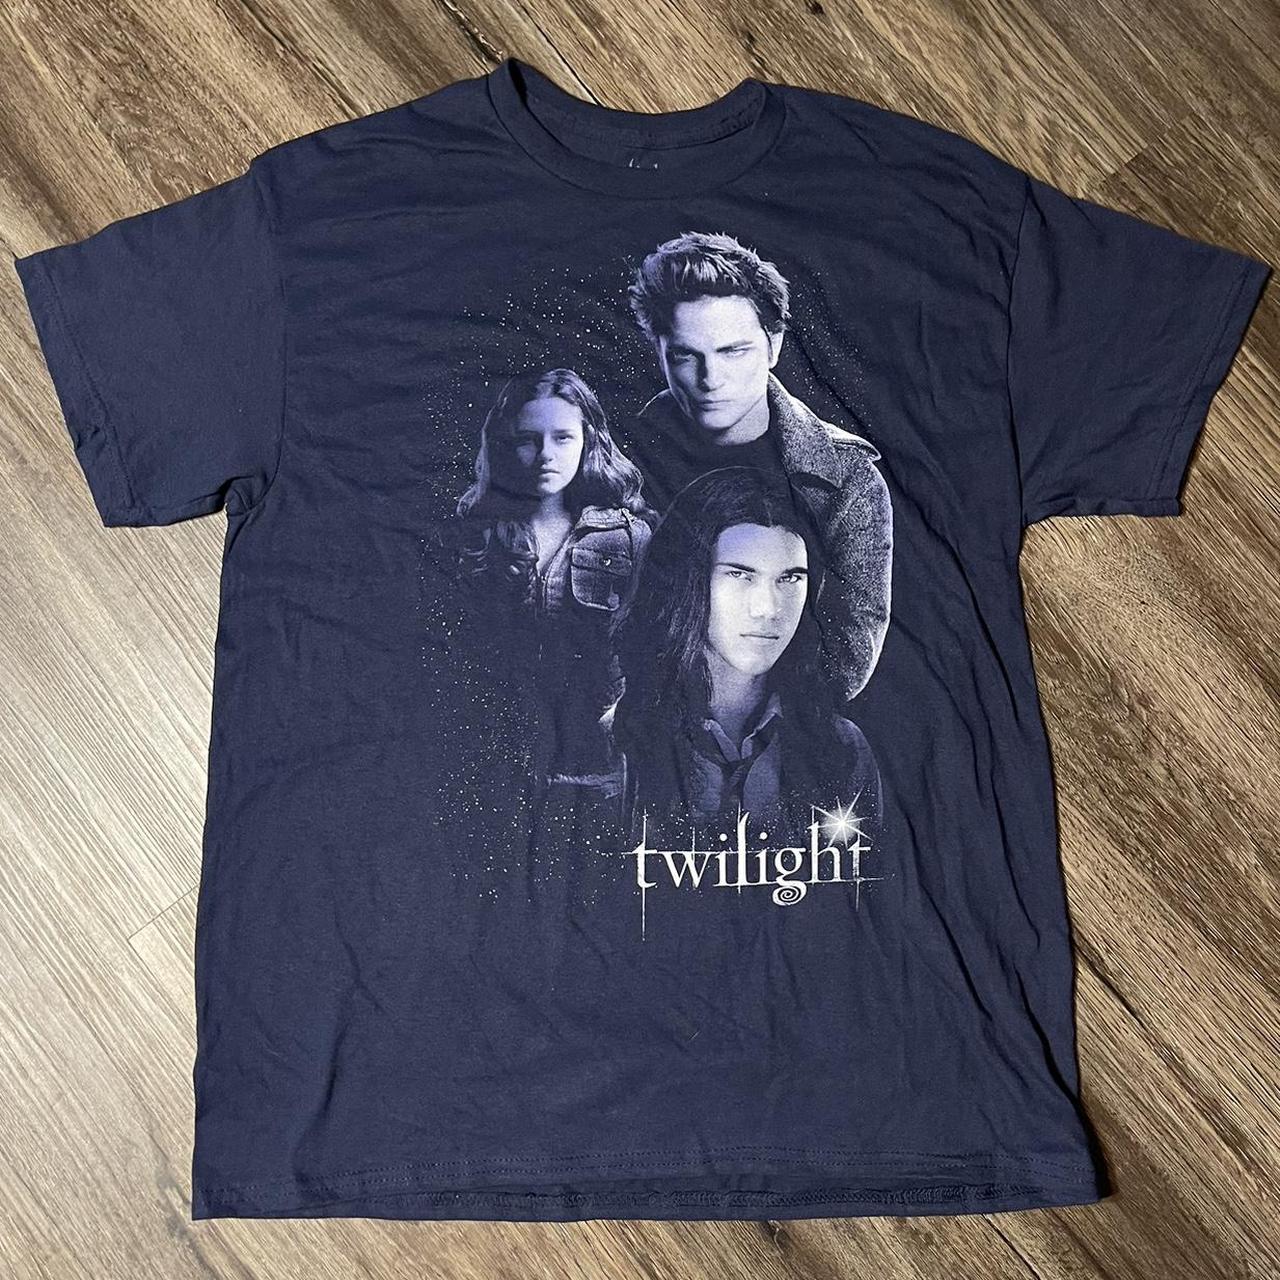 Twilight T-Shirt Dress  Urban Outfitters Canada